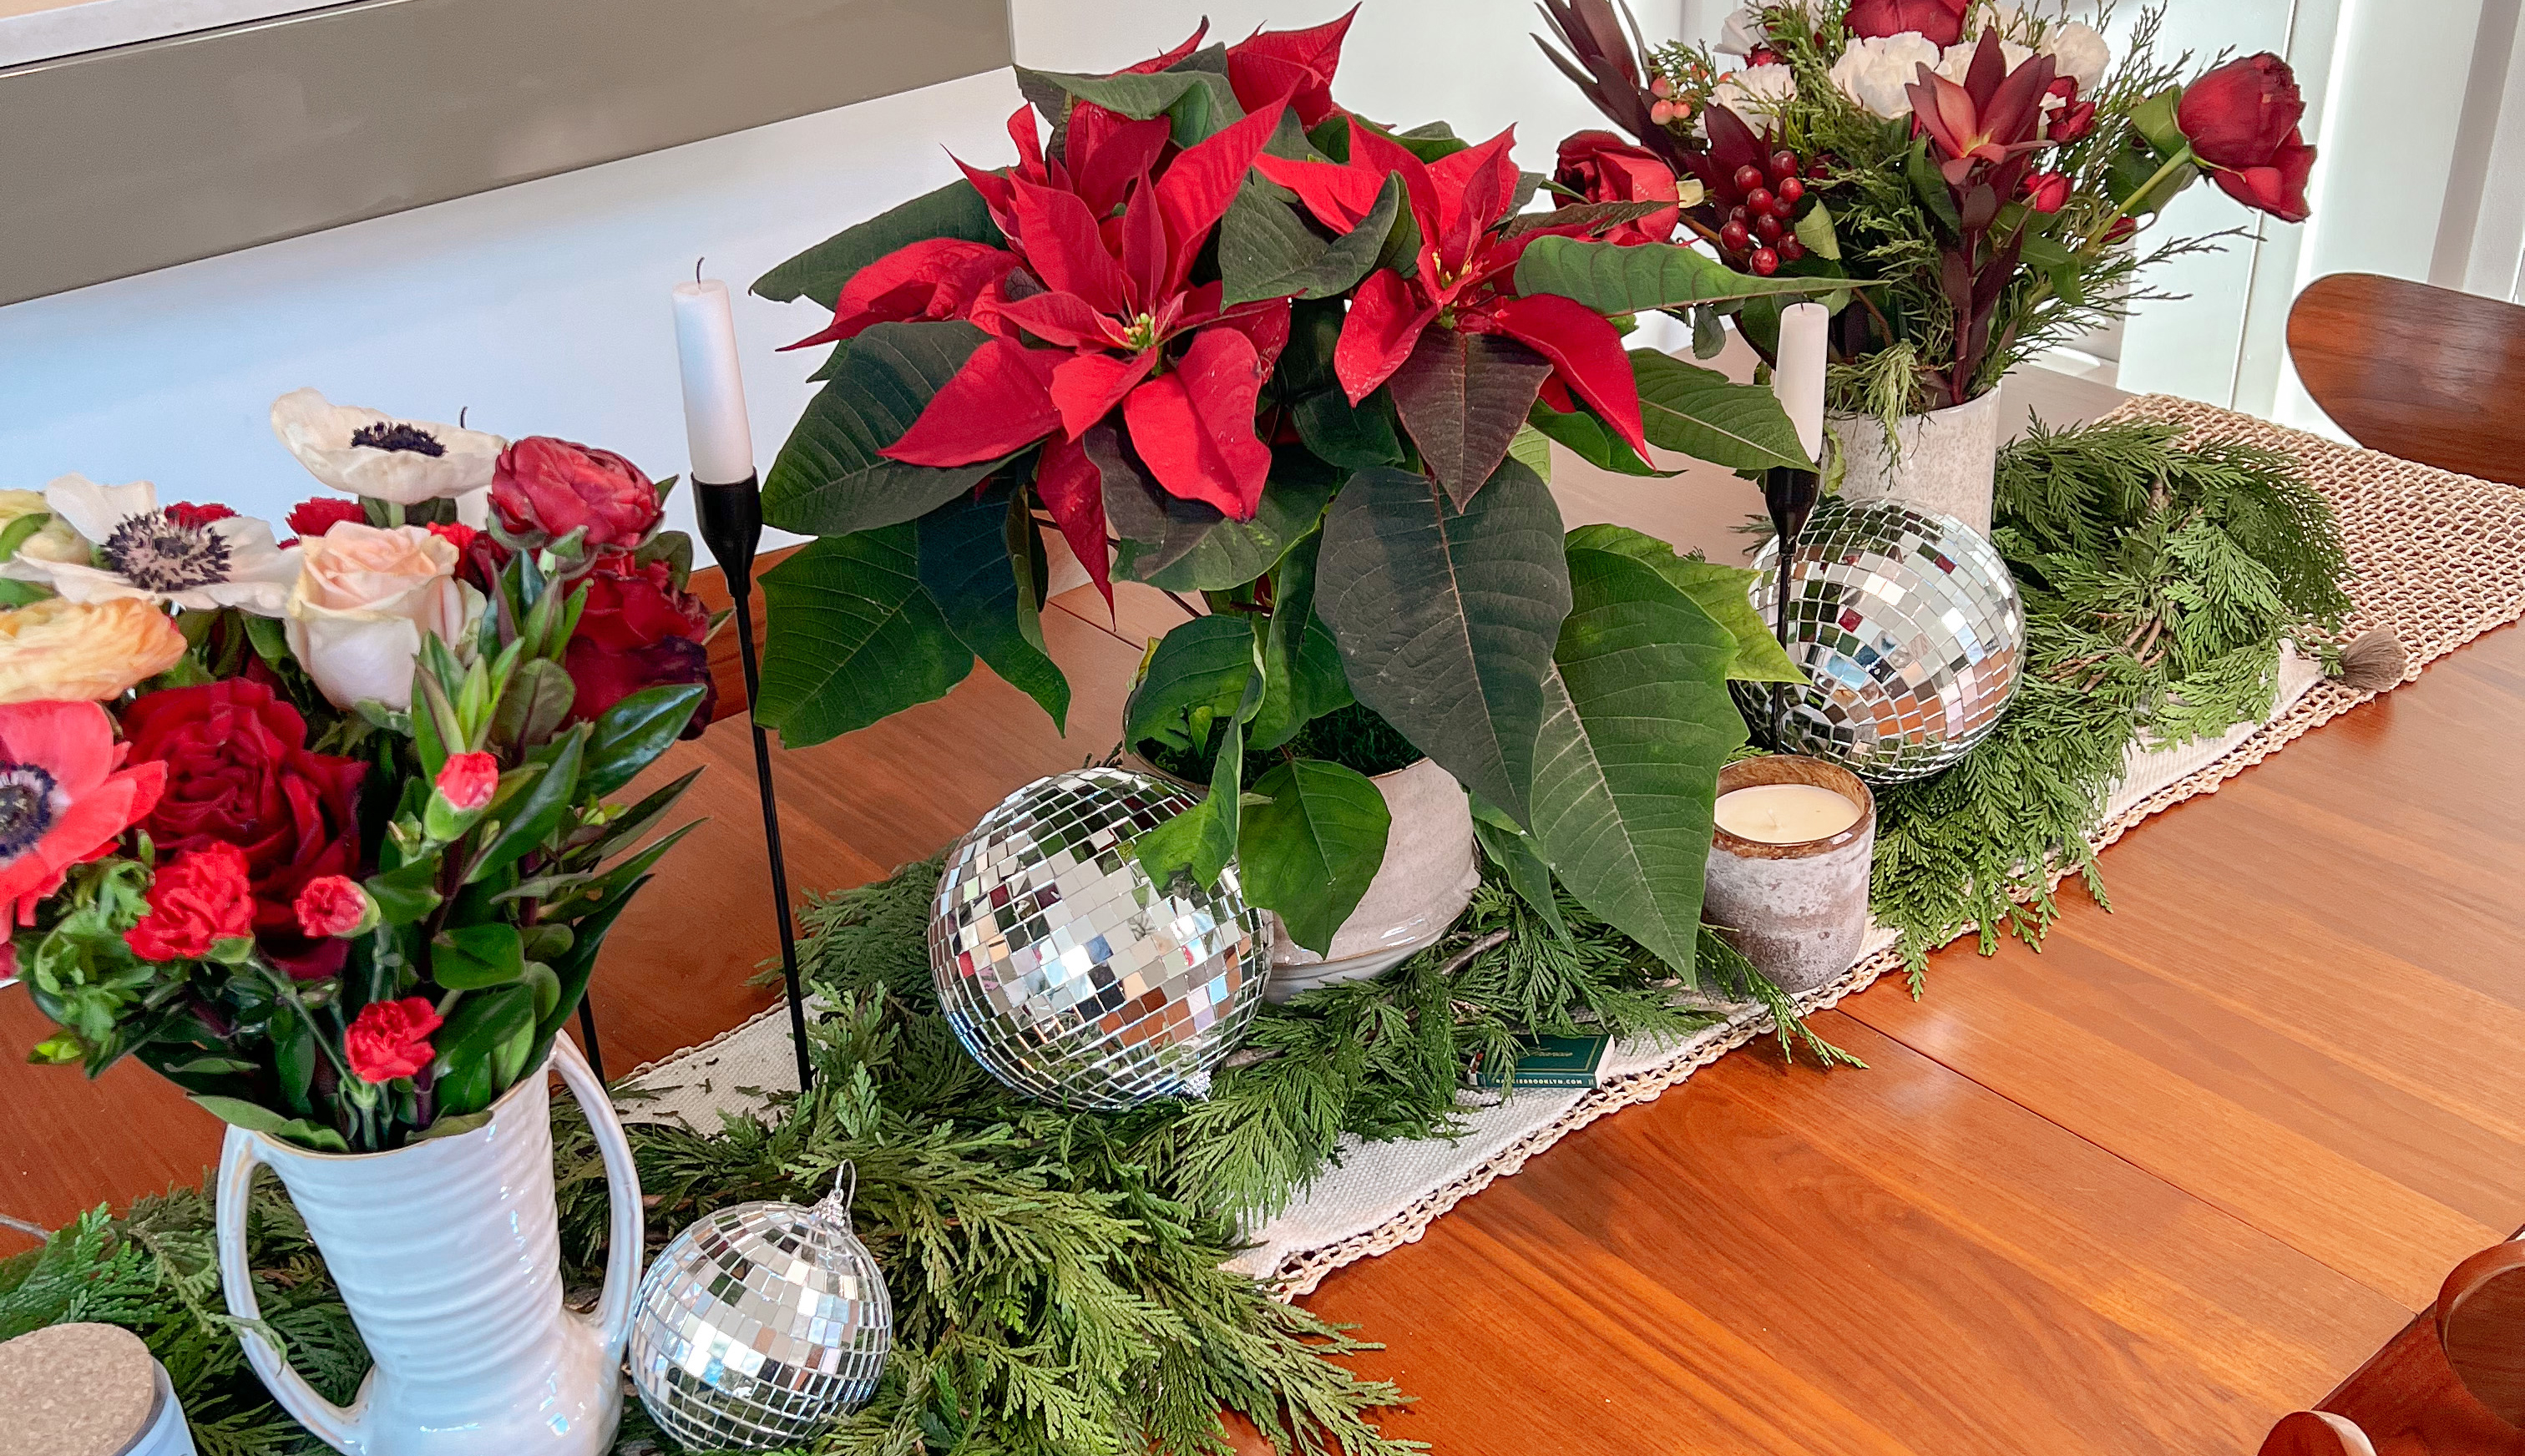 Holiday centerpiece featuring floral arrangements and poinsettia plants